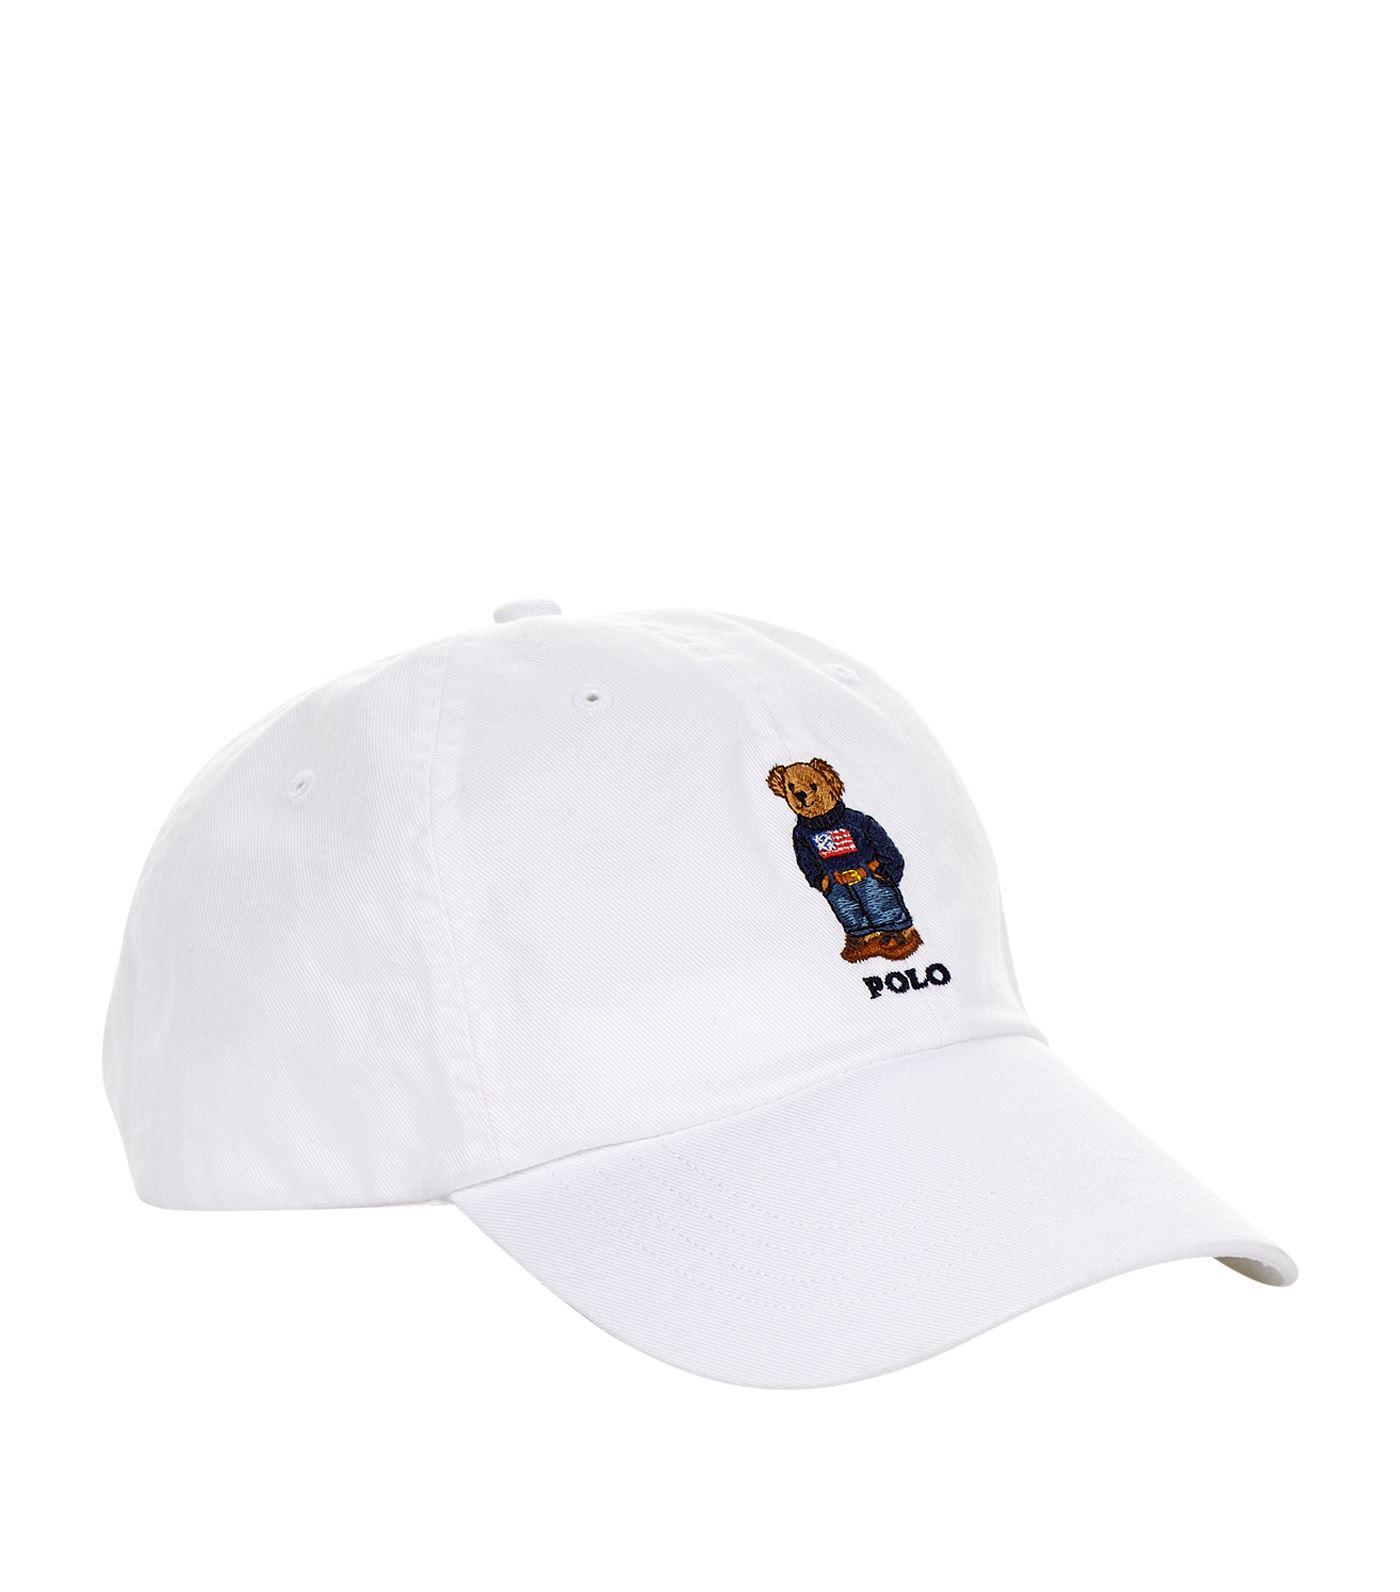 Polo Ralph Lauren Cotton Embroidered Bear Cap in White for Men - Lyst